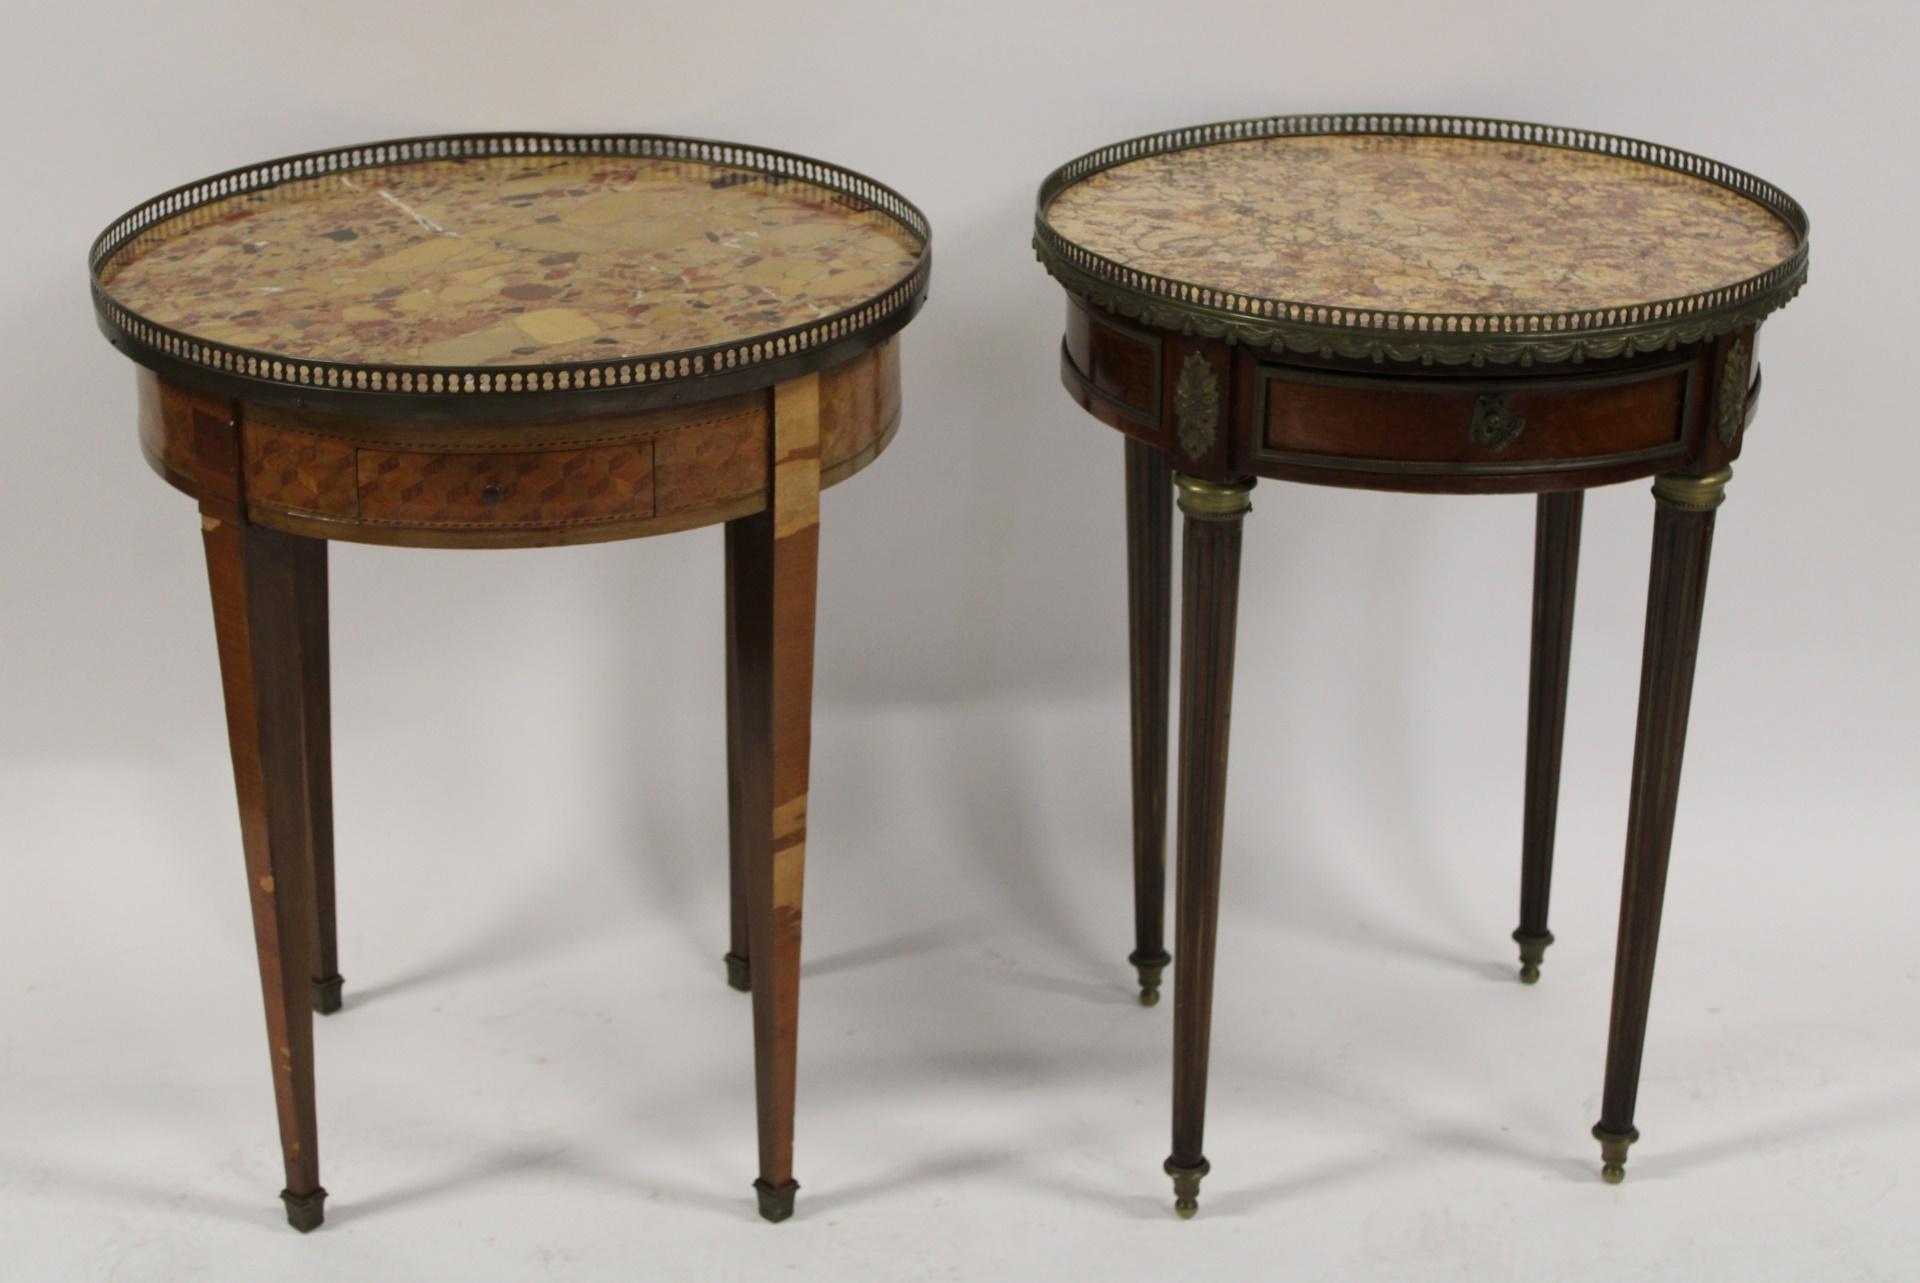 2 ANTIQUE CONTINENTAL MARBLETOP